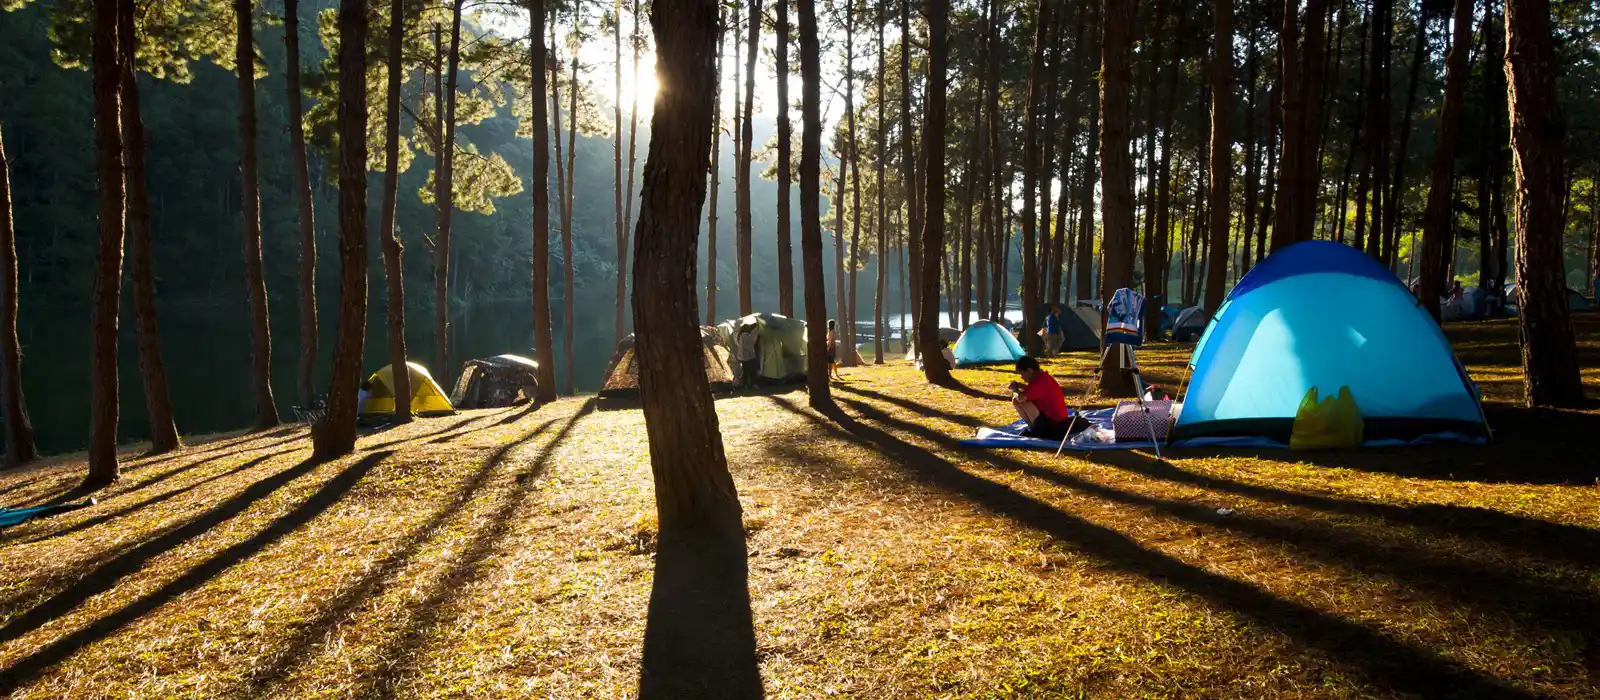 Woodland and forest campsites